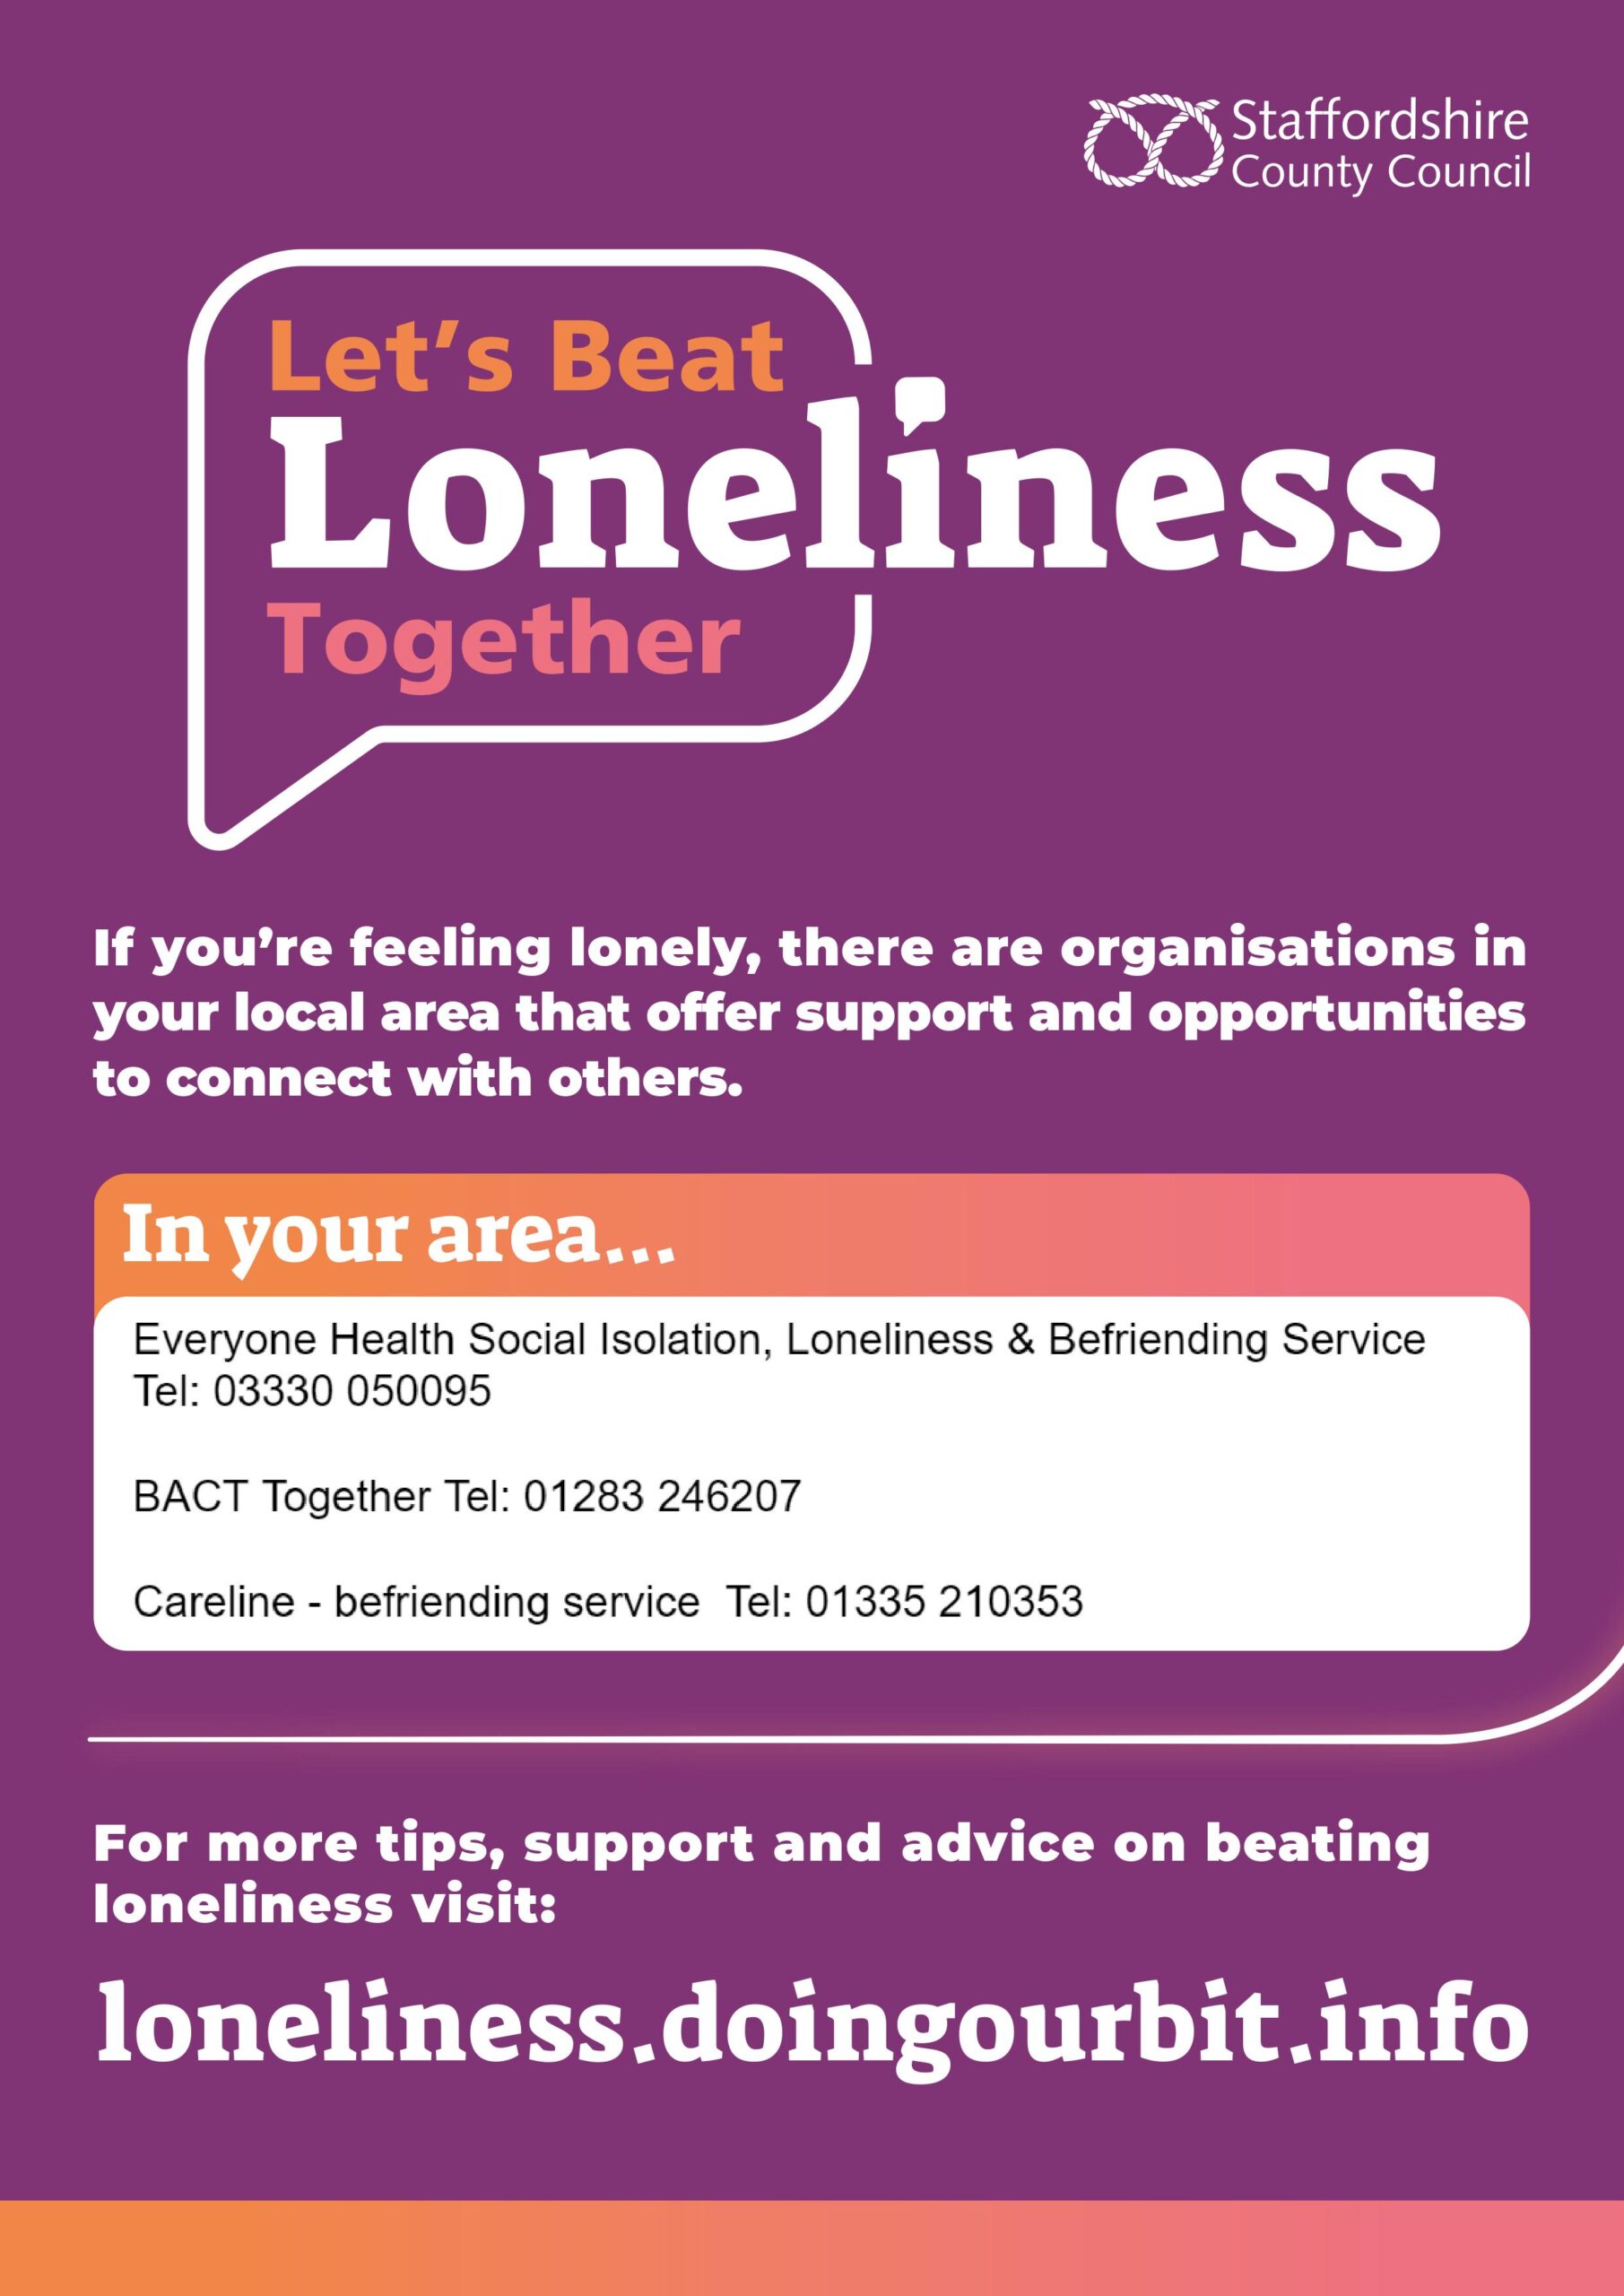 Let’s Beat Loneliness Together